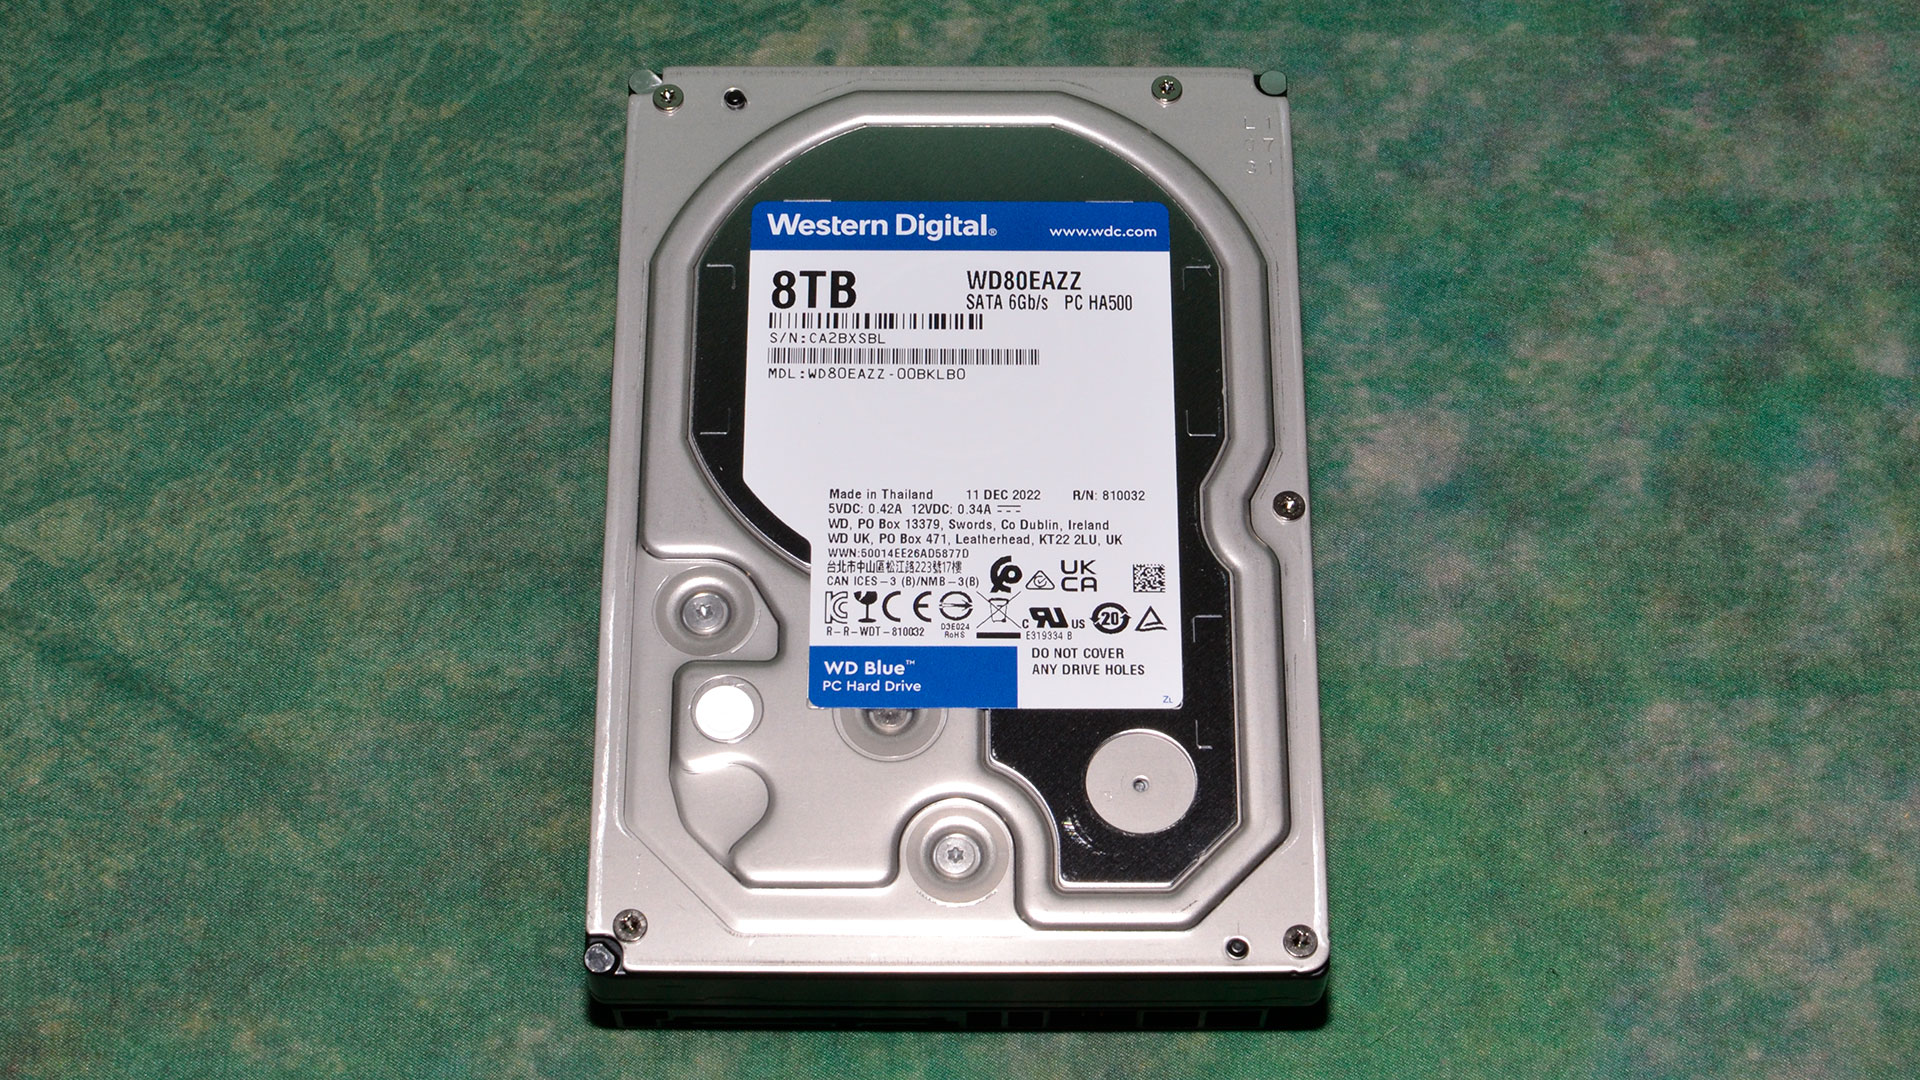 WD Blue 8TB HDD Review: A Balanced, Entry-Level Hard Drive | Tom's